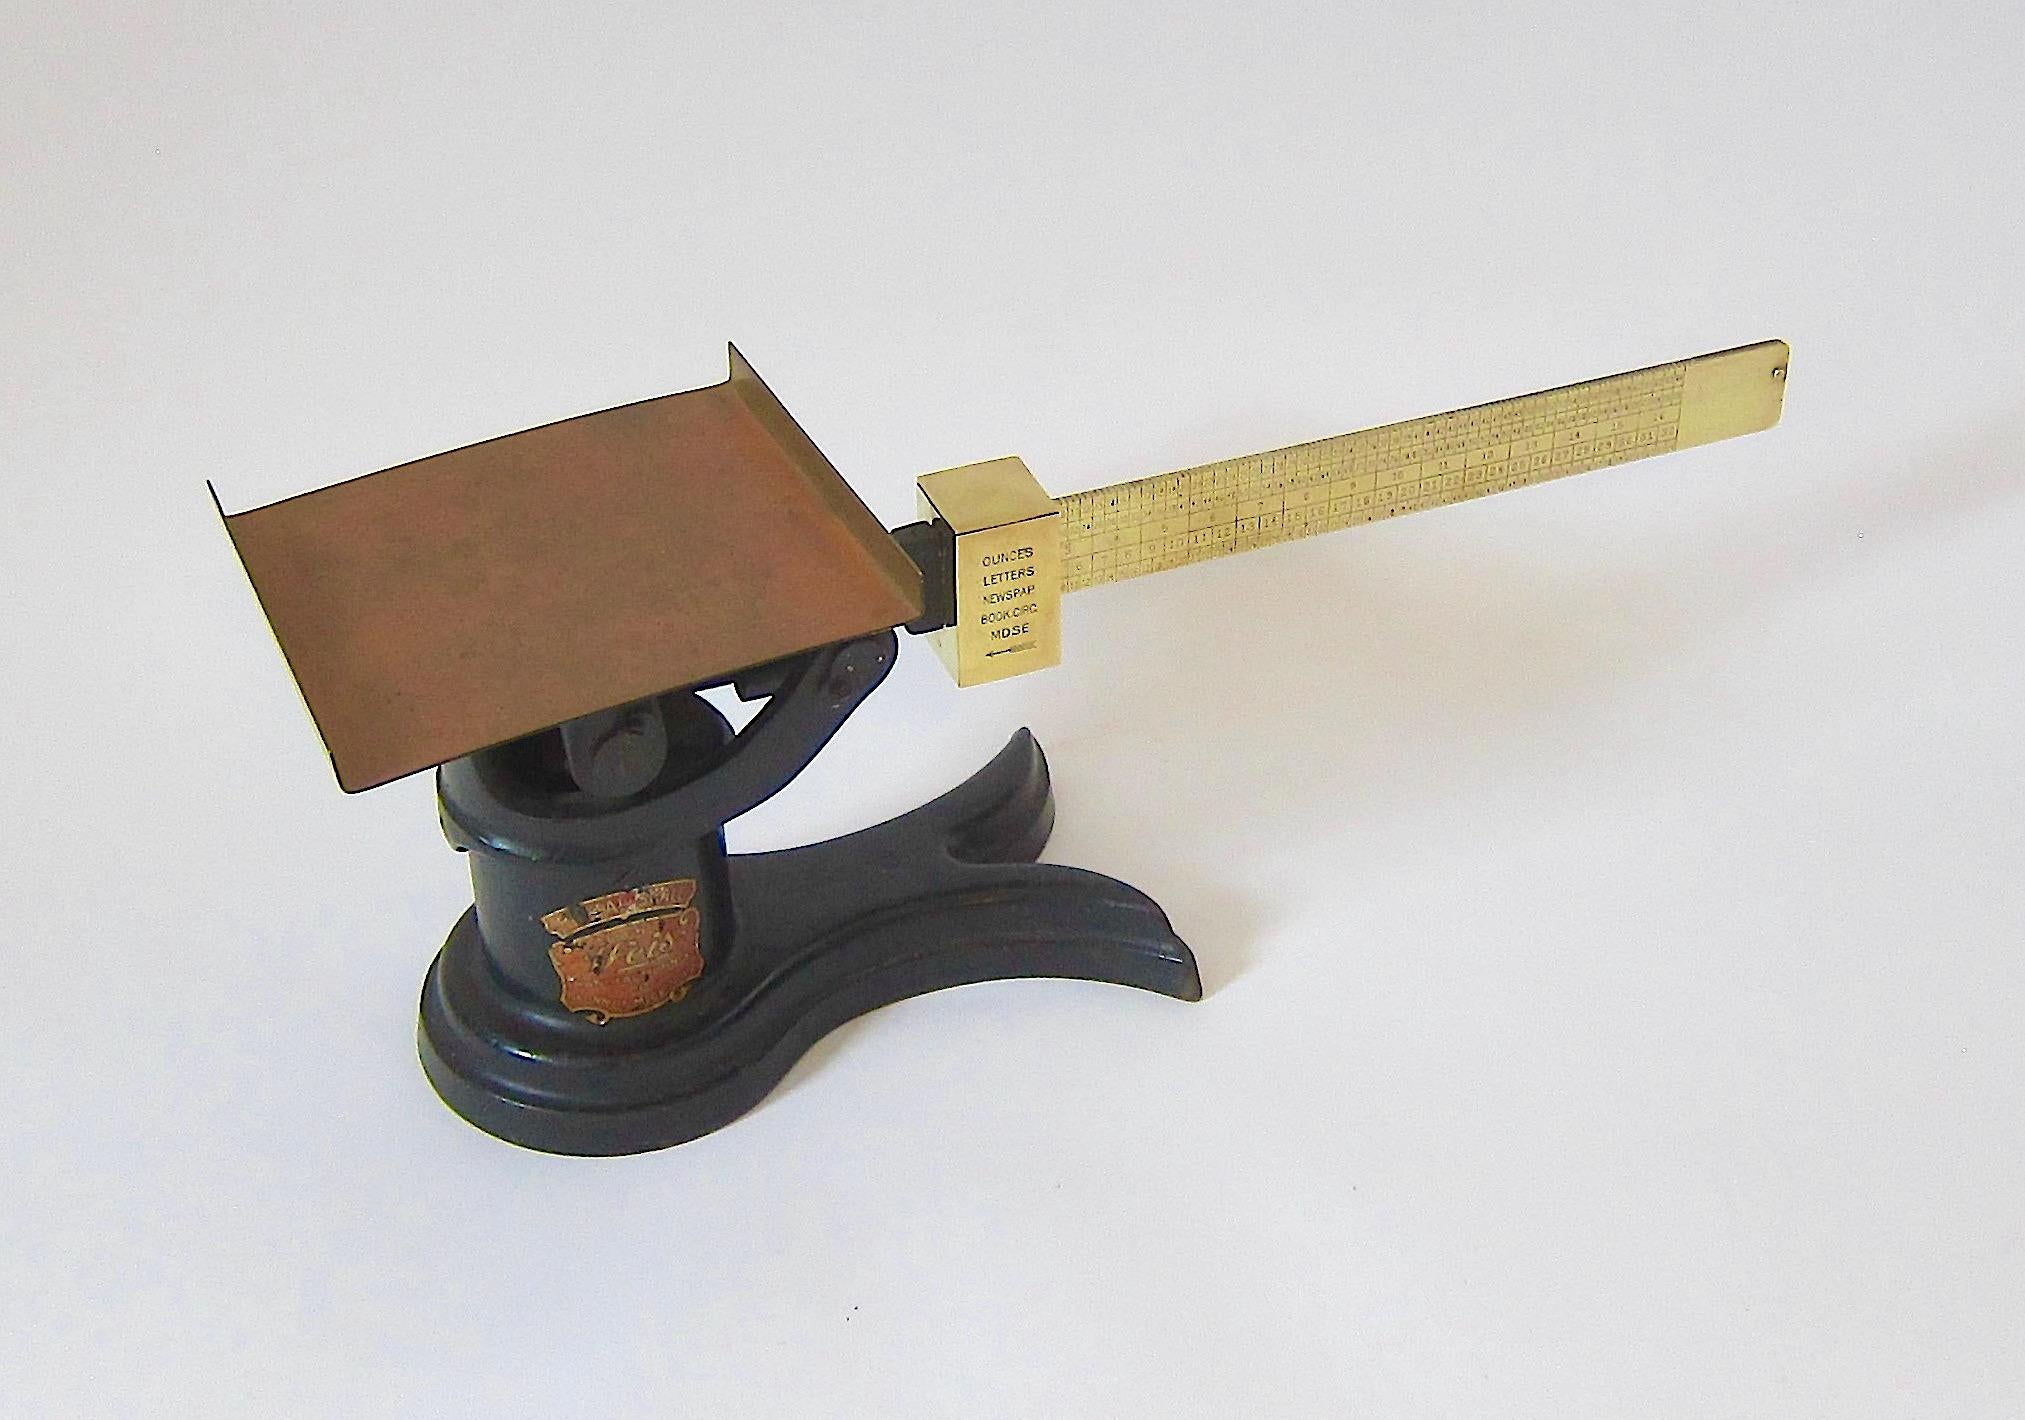 An antique American post office scale in working condition by Weis Manufacturing Company of Monroe, Michigan, USA. The base is shaped like a fishtail in heavy cast iron with a tray, arm, and counter weight of cast brass. The strong silhouette and